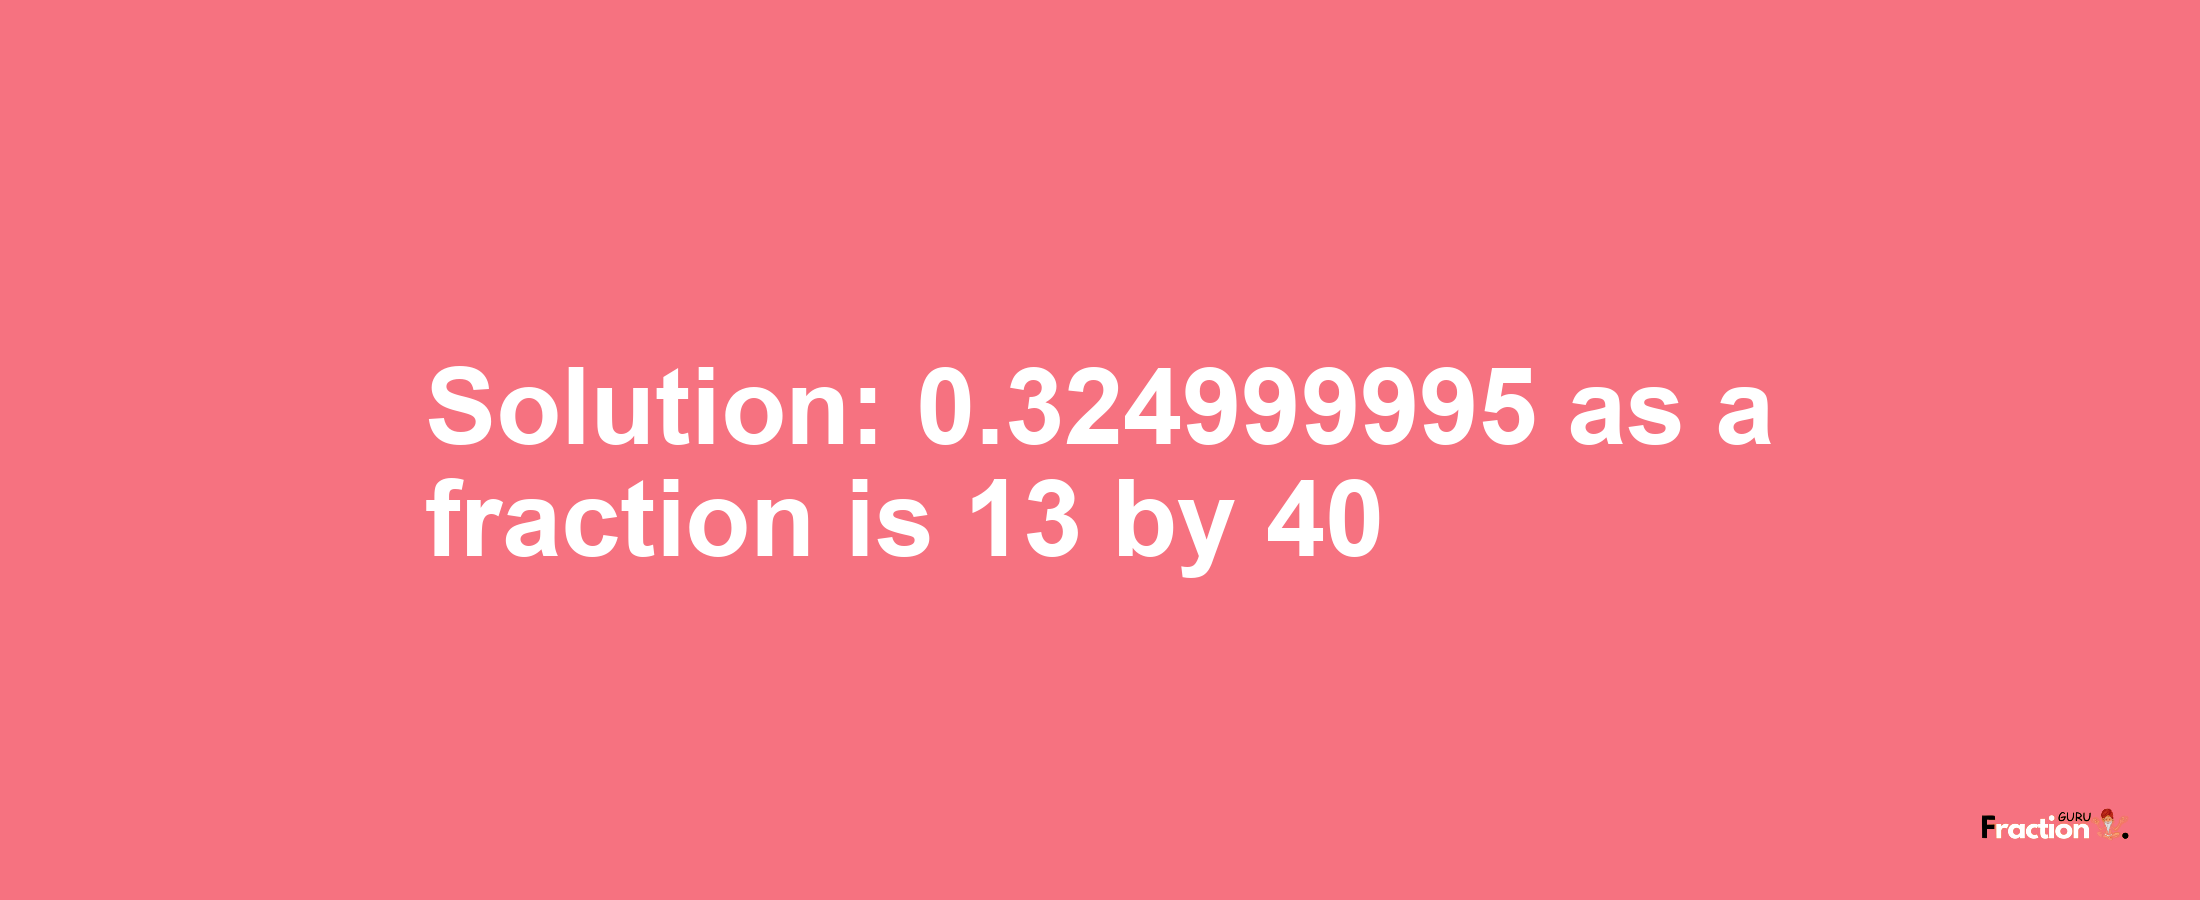 Solution:0.324999995 as a fraction is 13/40